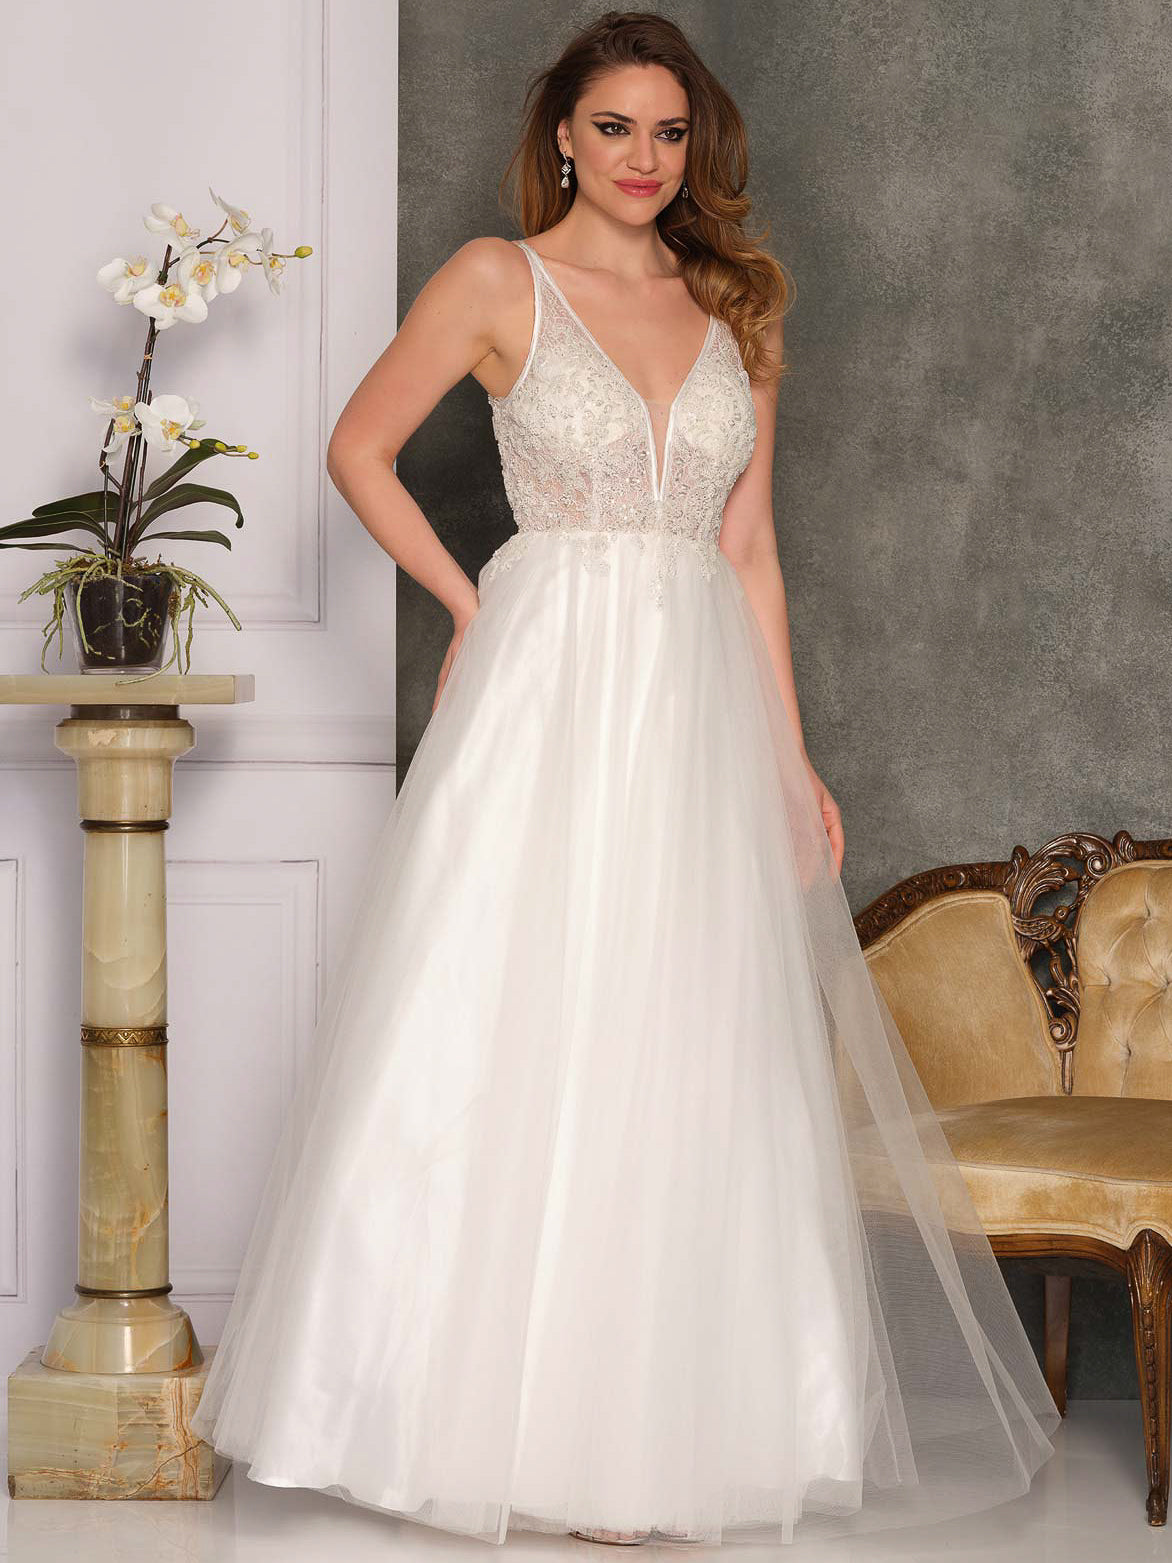 MEHS EMBROIDERED SLEEVELESS WEDDING GOWN